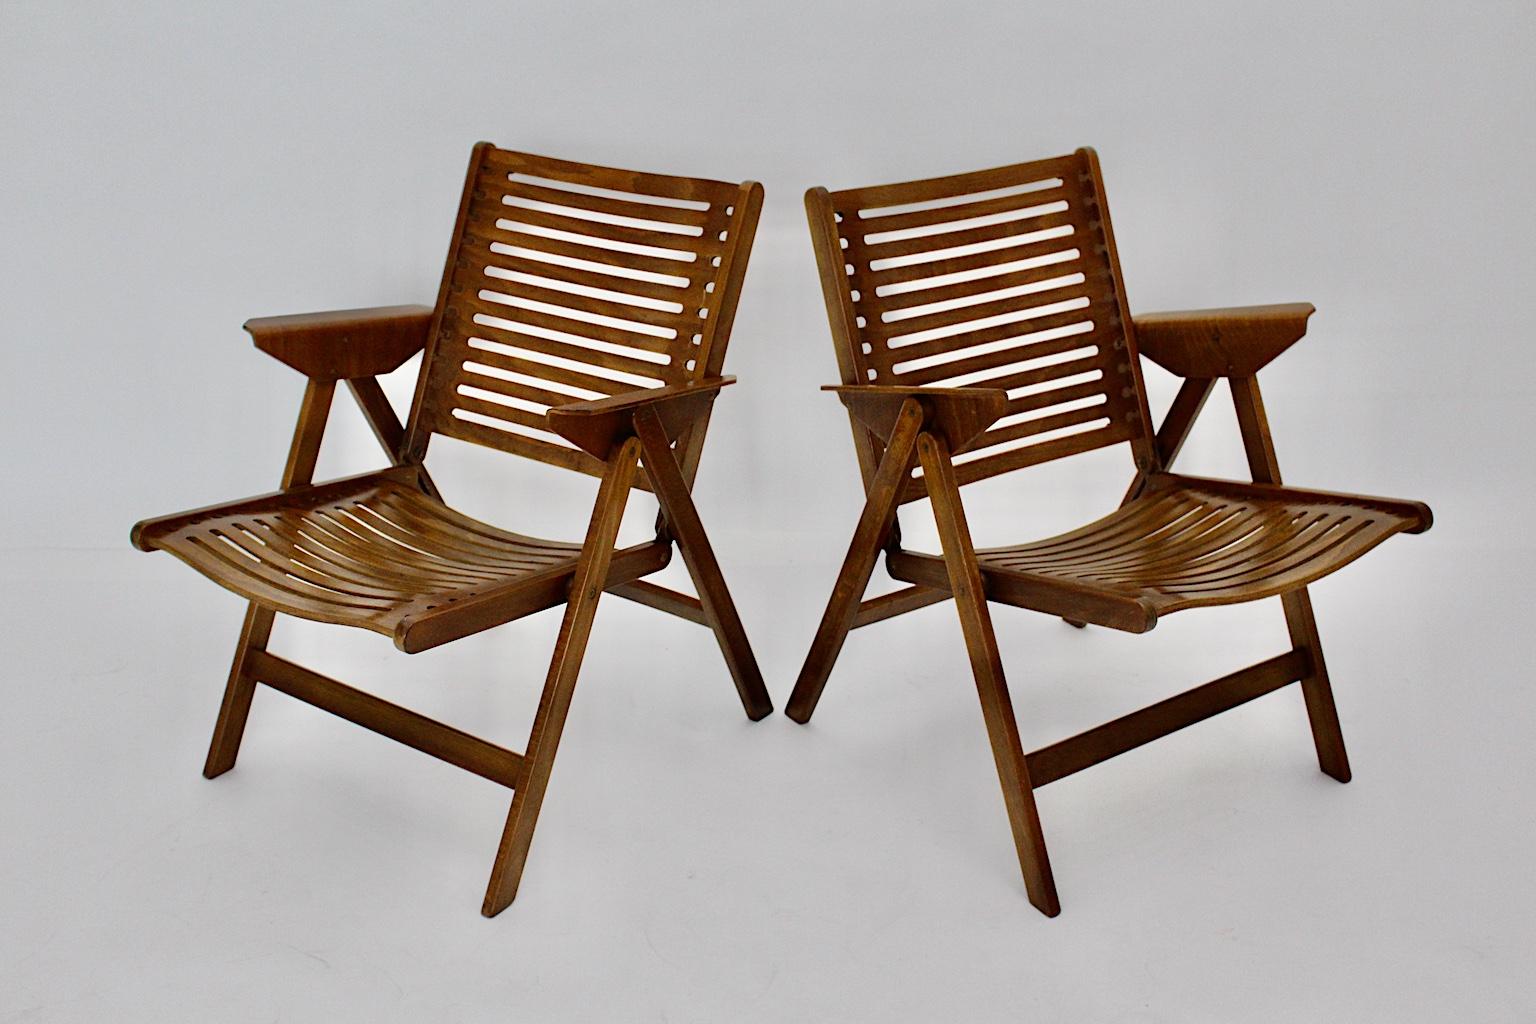 Mid century Modern  pair of vintage armchairs designed by Niko Kralj, which are foldable!
Niko Kralj (1920-2013)
This presented pair of Rex chairs are great design pieces and exhibited in the Museum of Modern Art in New York City as well as the